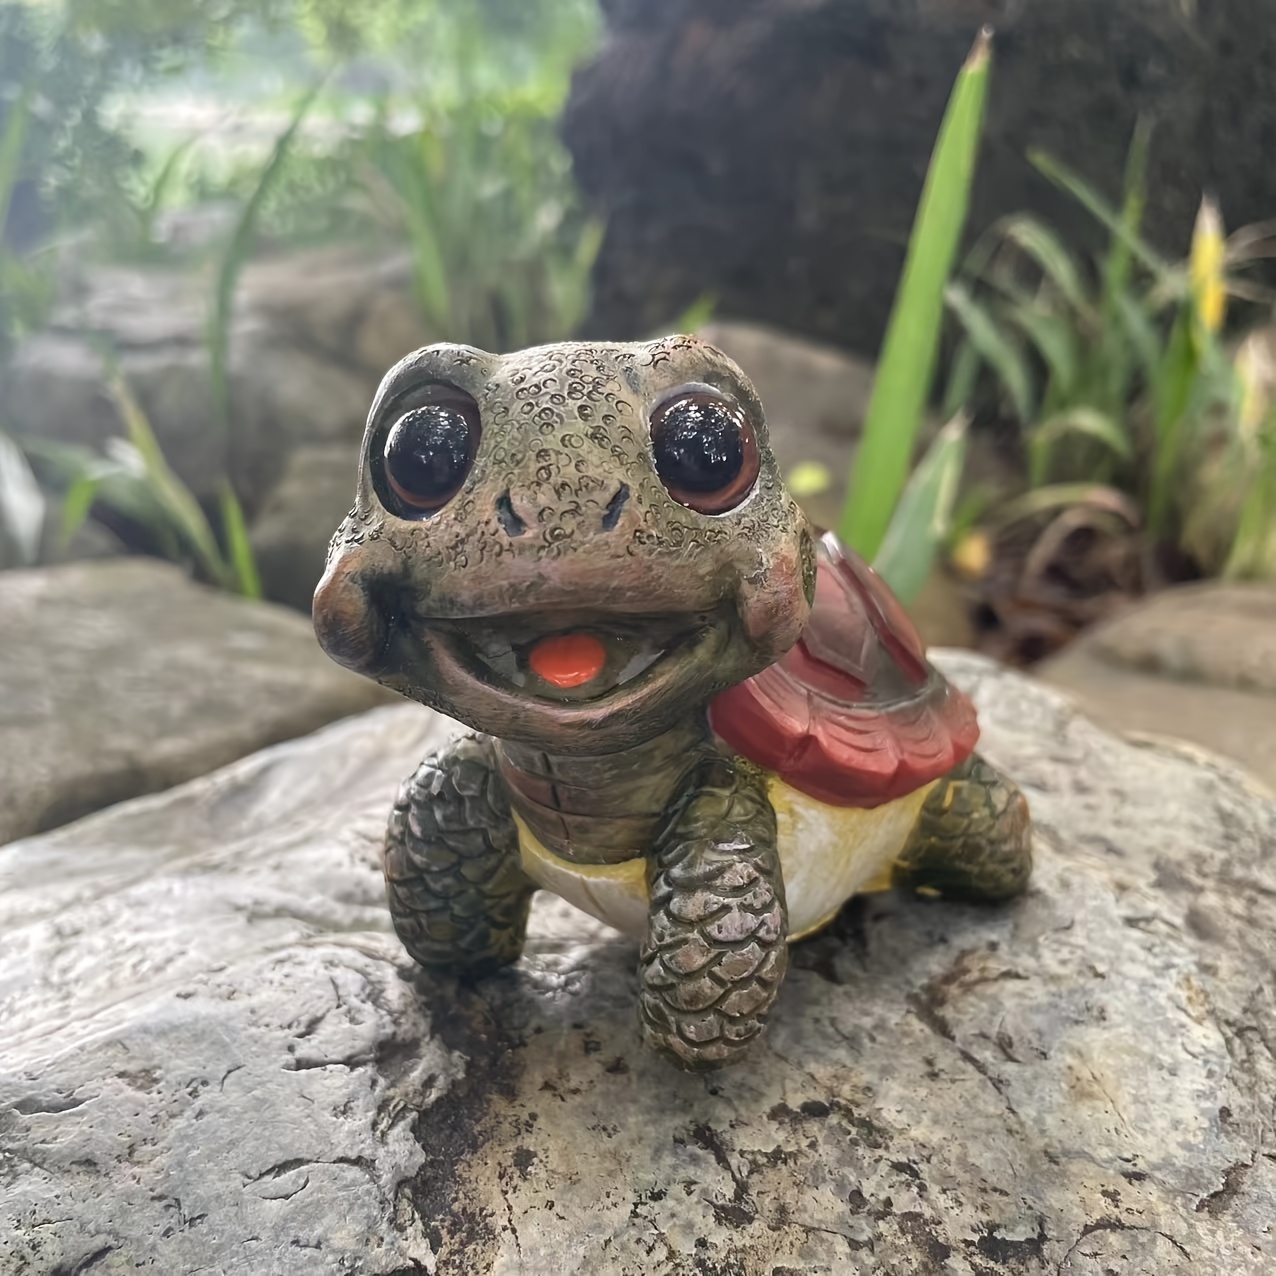 

unique" Charming Cartoon Turtle With Big Eyes - Perfect For Garden, Patio, And Home Decor | Resin Art & Craft